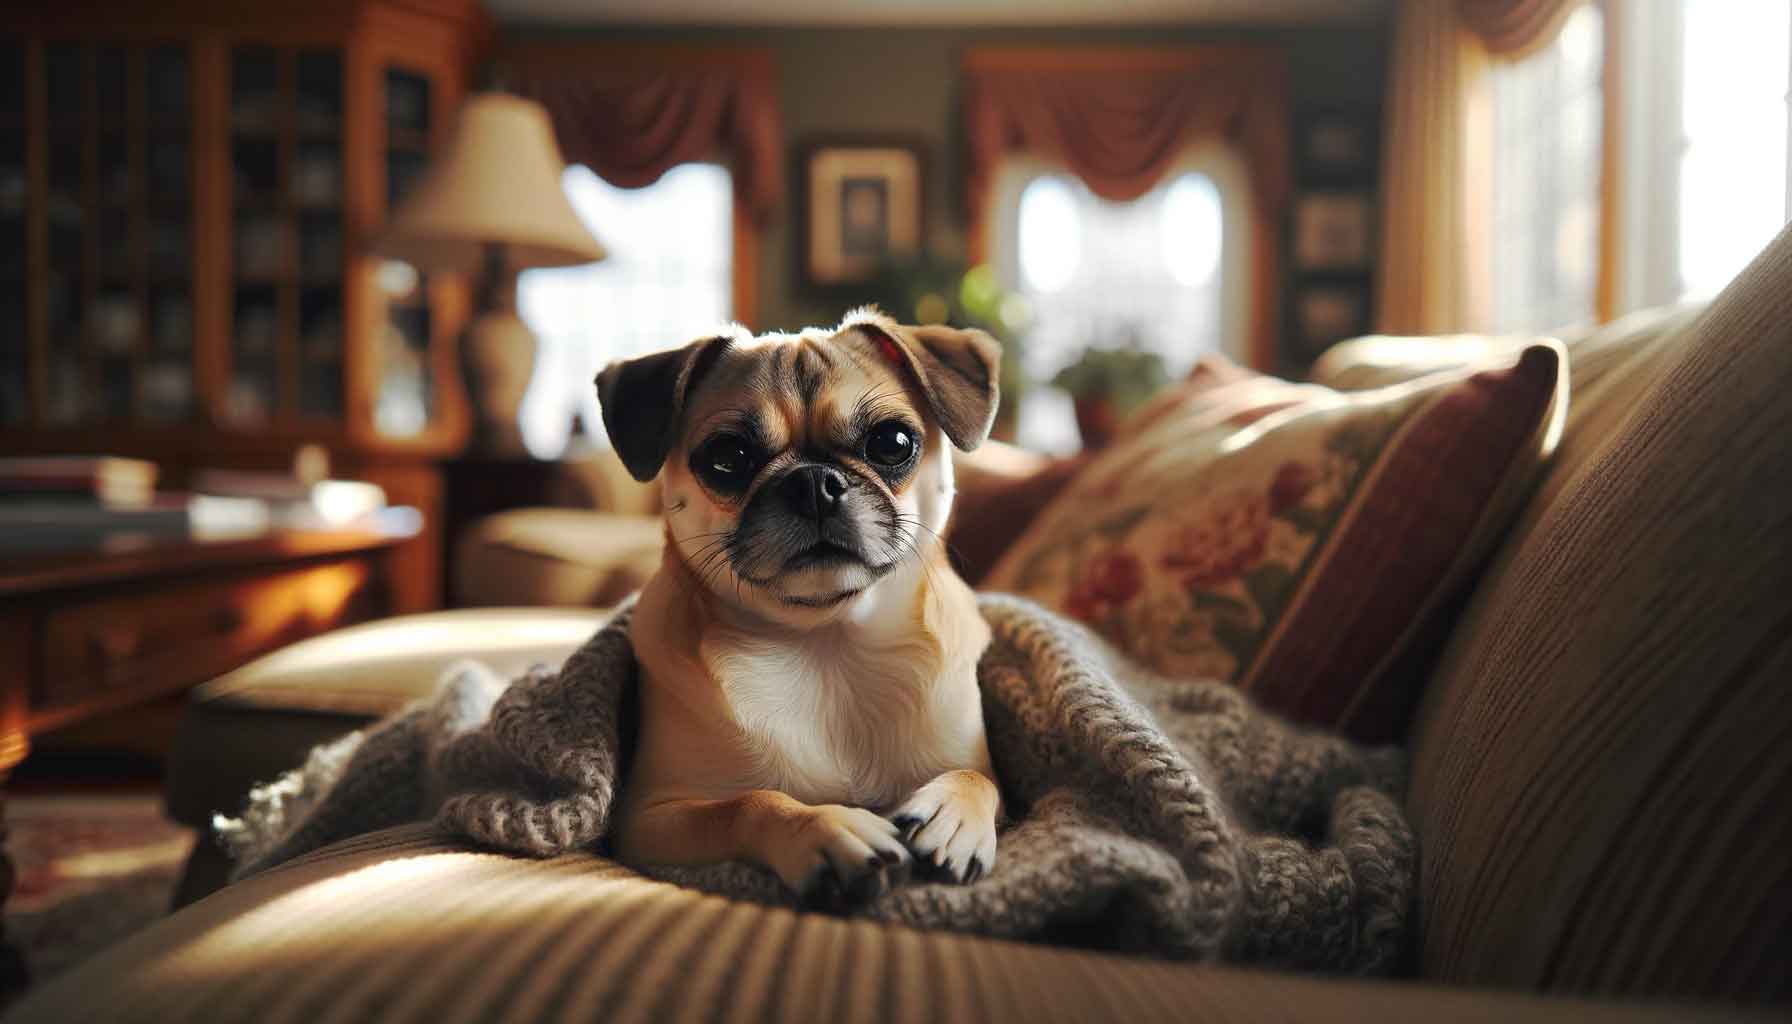 Photograph of a small, playful Micro Bully Pug Mix dog comfortably nestled in a family living room. The dog's cream and tan coat is highlighted by sunlight streaming through a nearby window. The room features soft-colored furniture, adding to the warm, welcoming atmosphere.